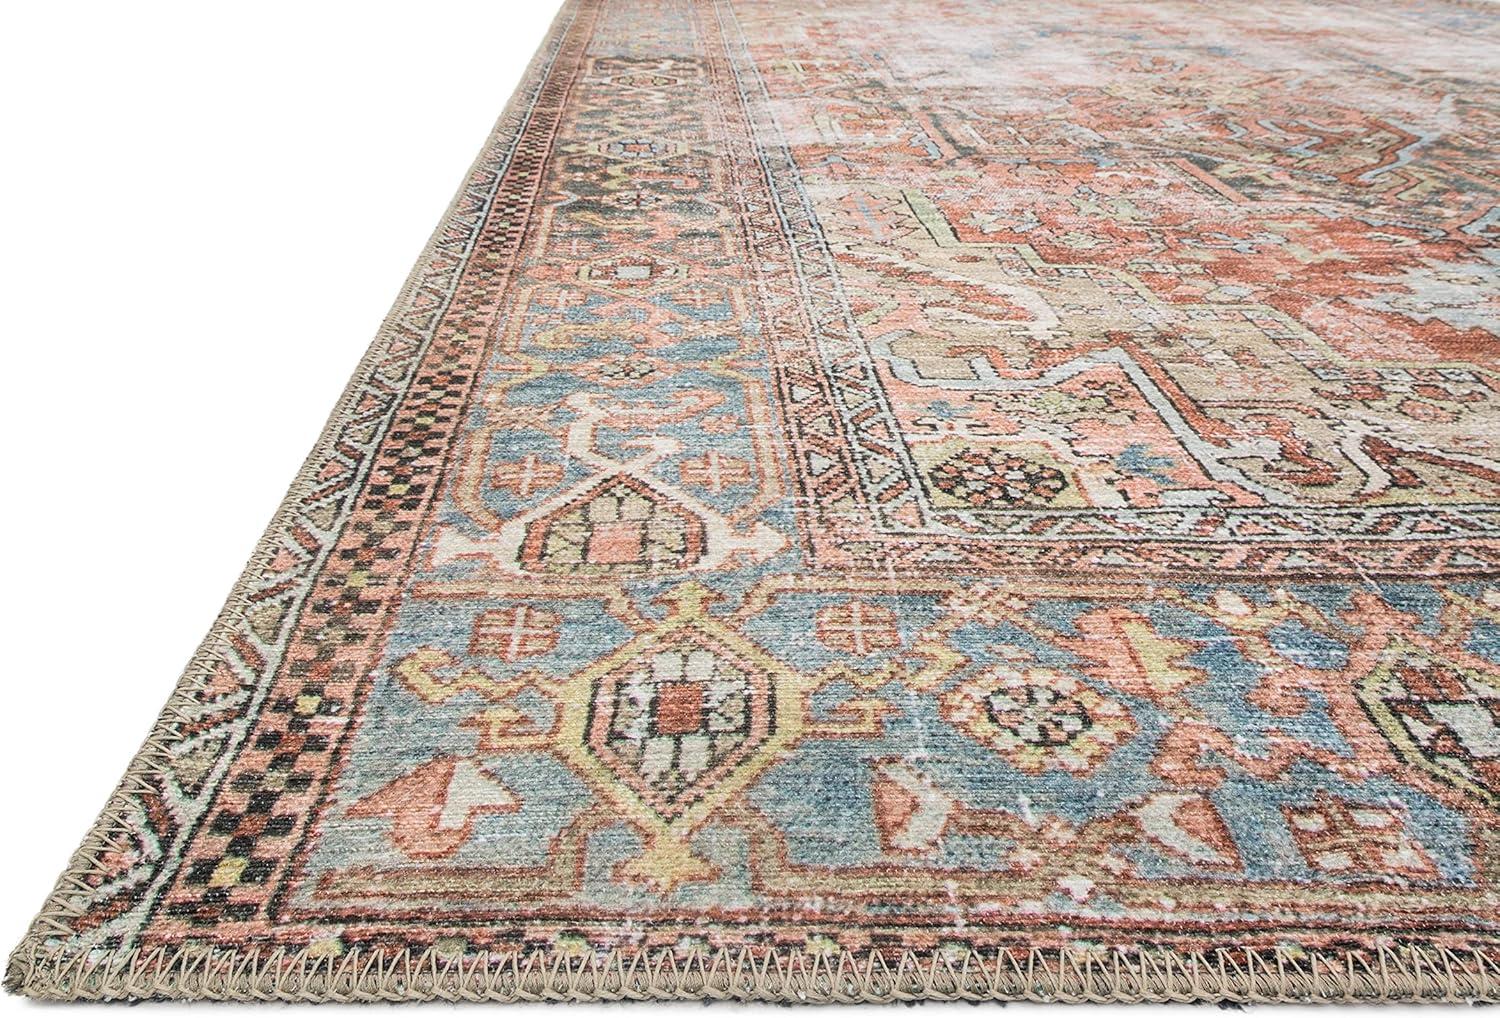 Classic Sky Blue 5' x 7'6" Hand-Knotted Wool Blend Rug